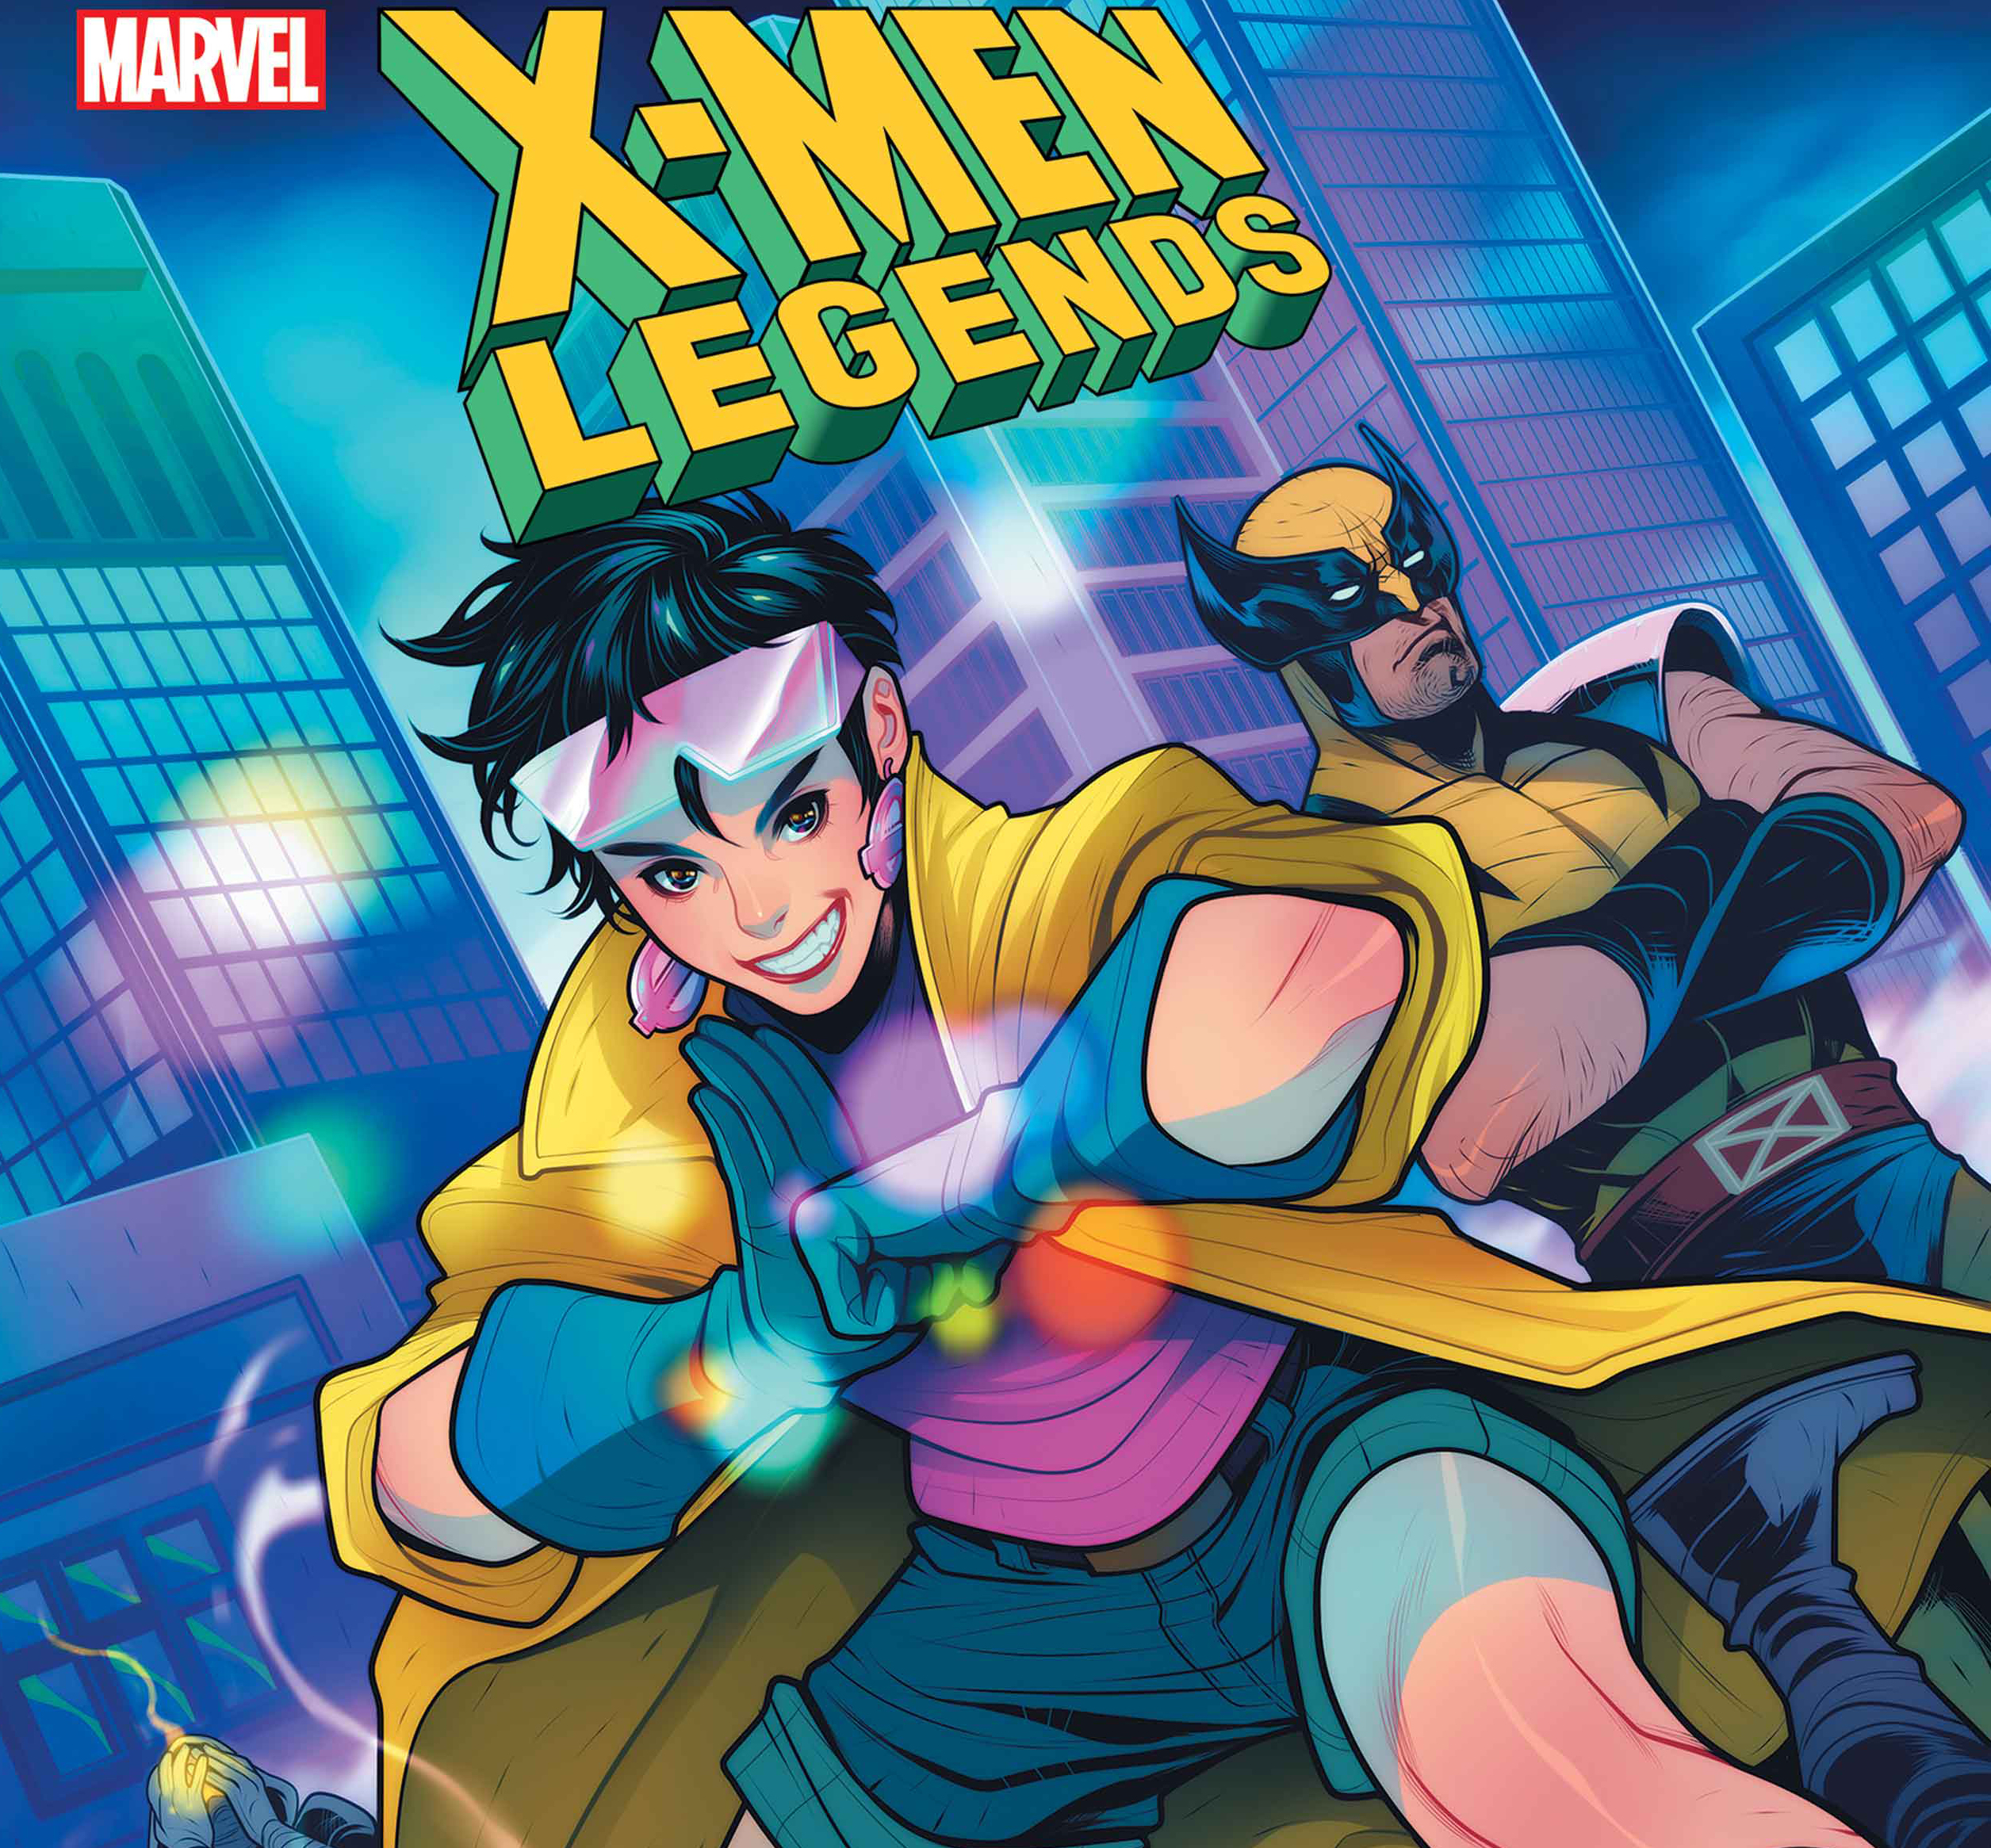 EXCLUSIVE Marvel First Look: X-Men Legends #7 variant cover